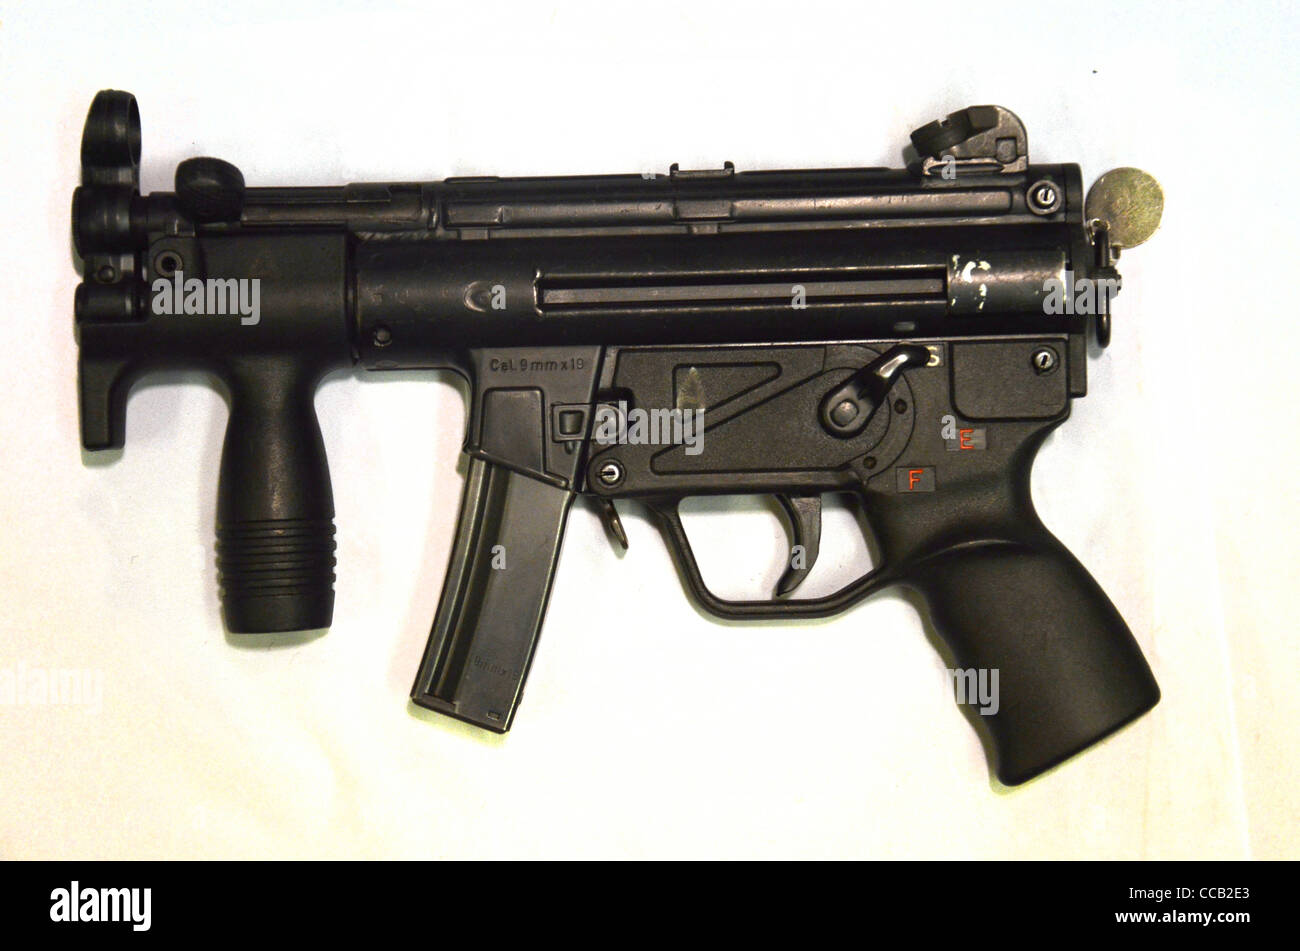 German Heckler and koch M5K 9mm current submachine gun automatic Stock Photo